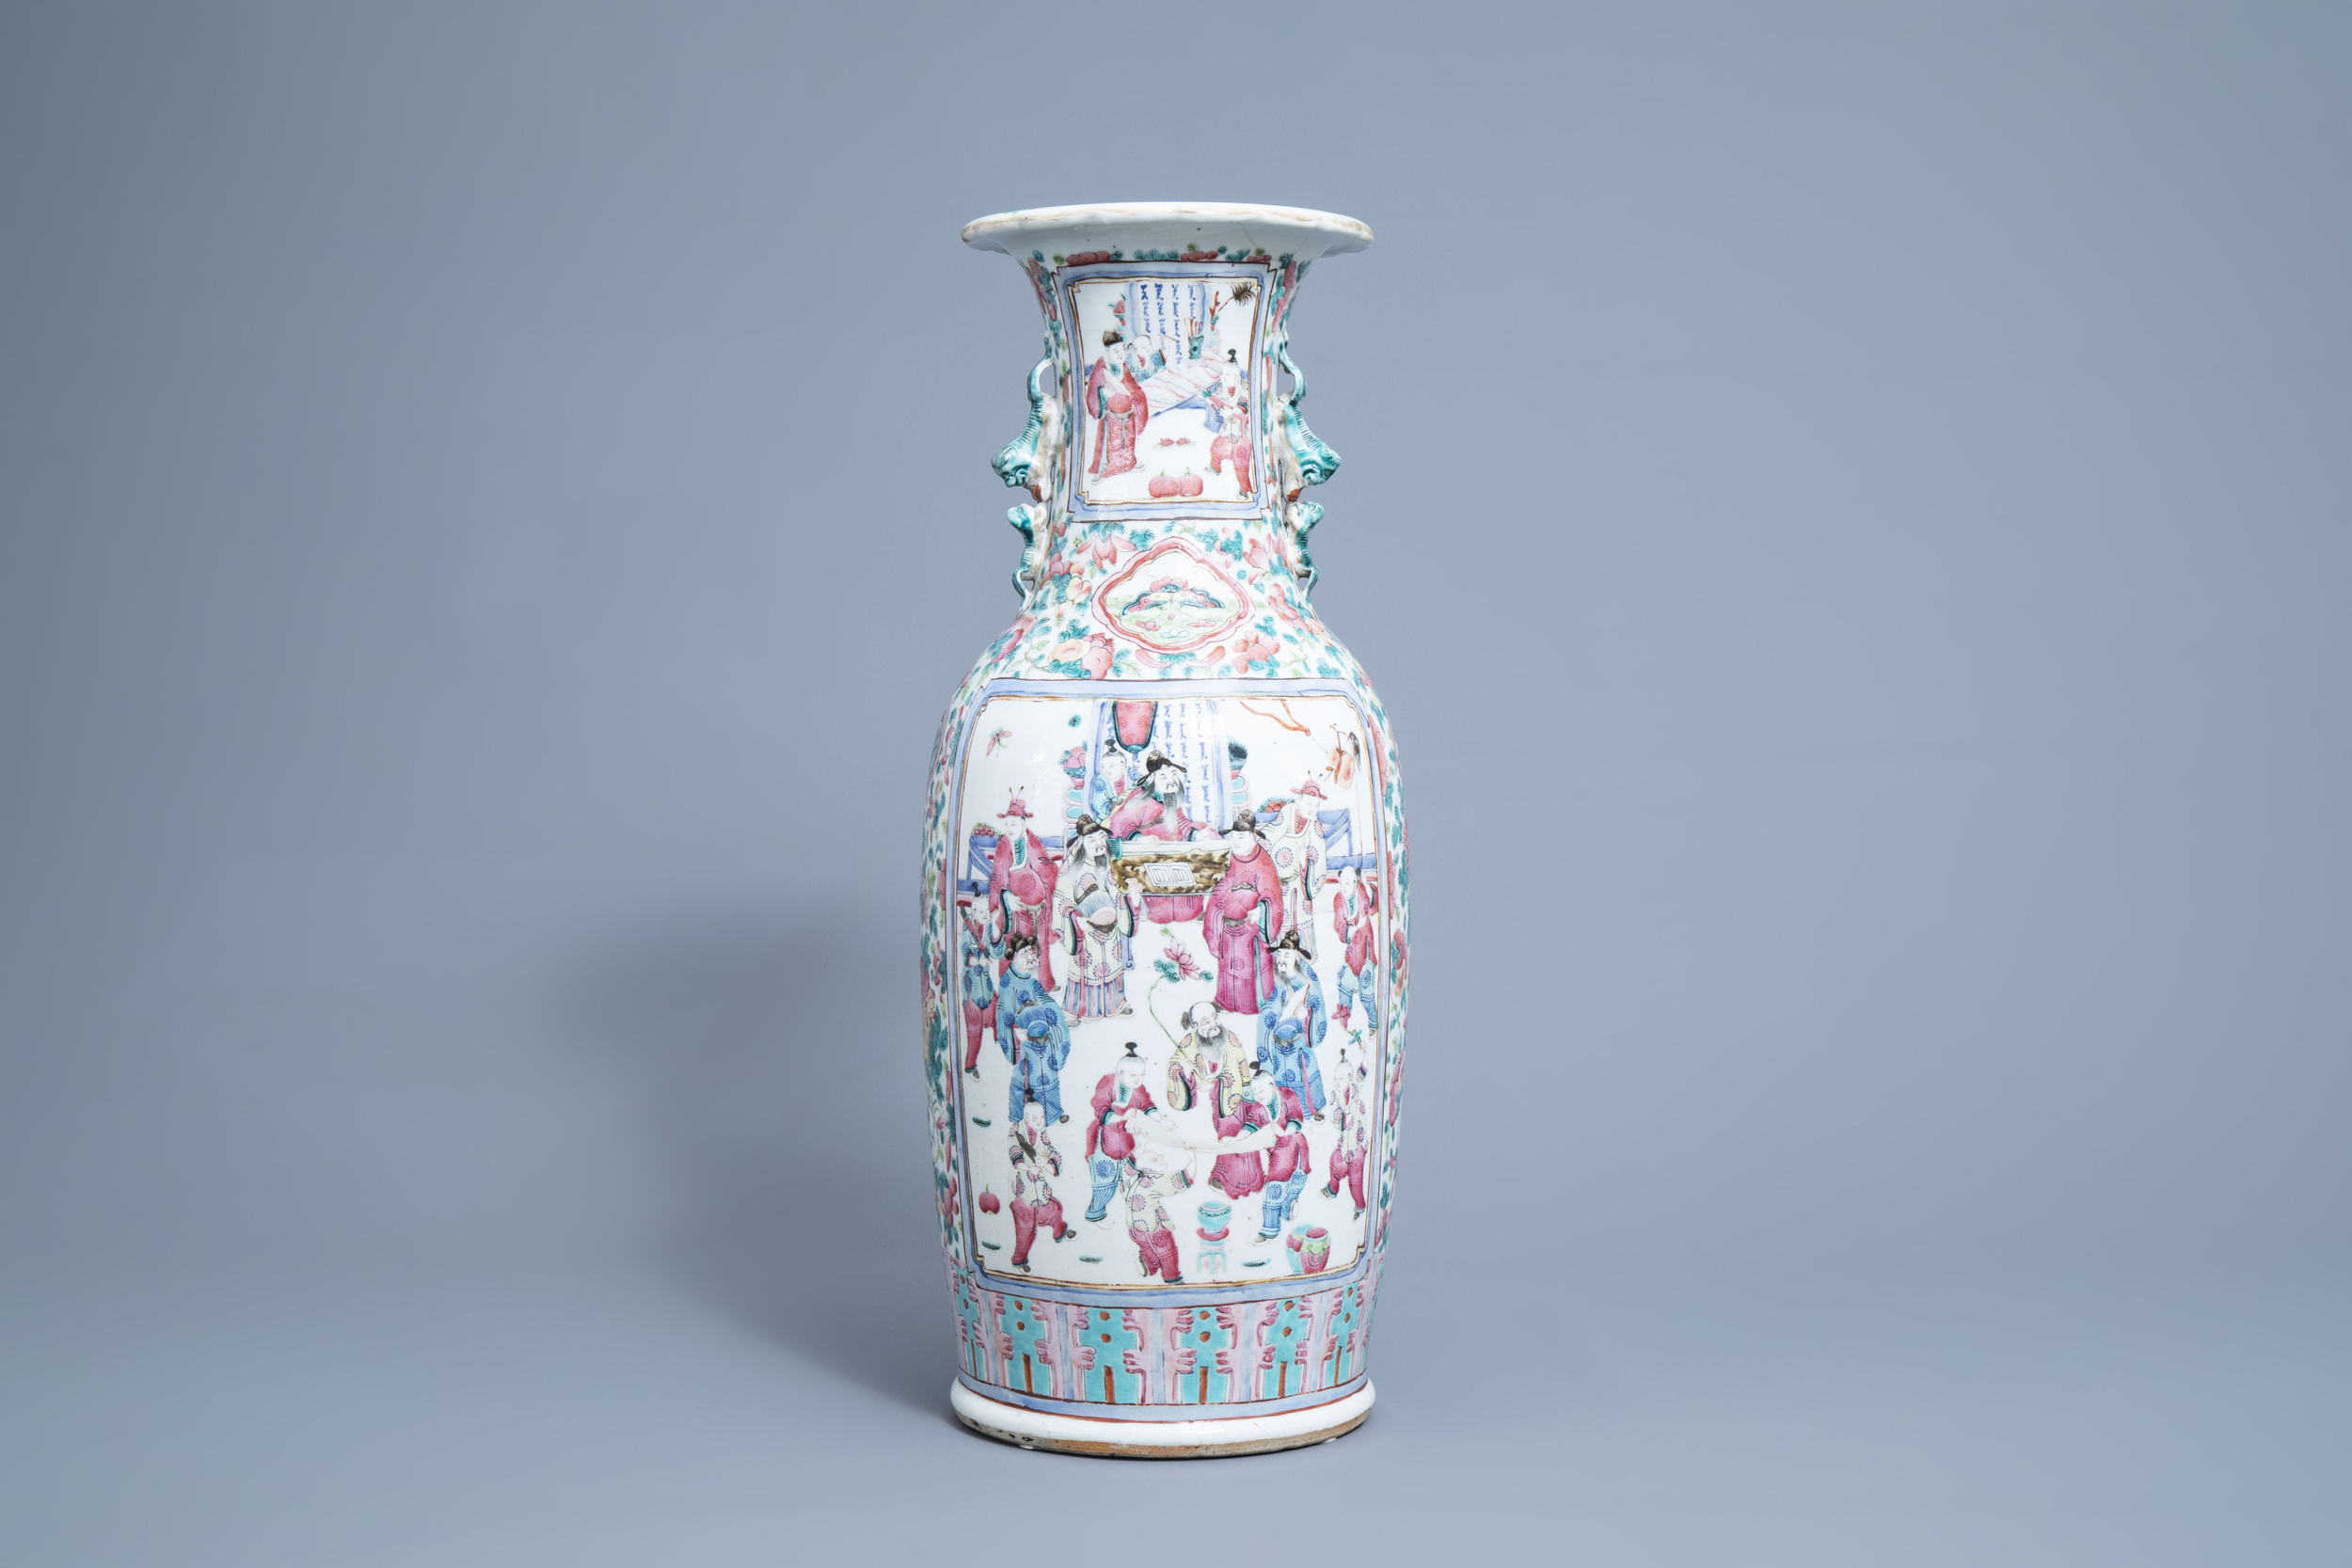 A Chinese famille rose vase with figurative and floral design, 19th C. - Image 3 of 6